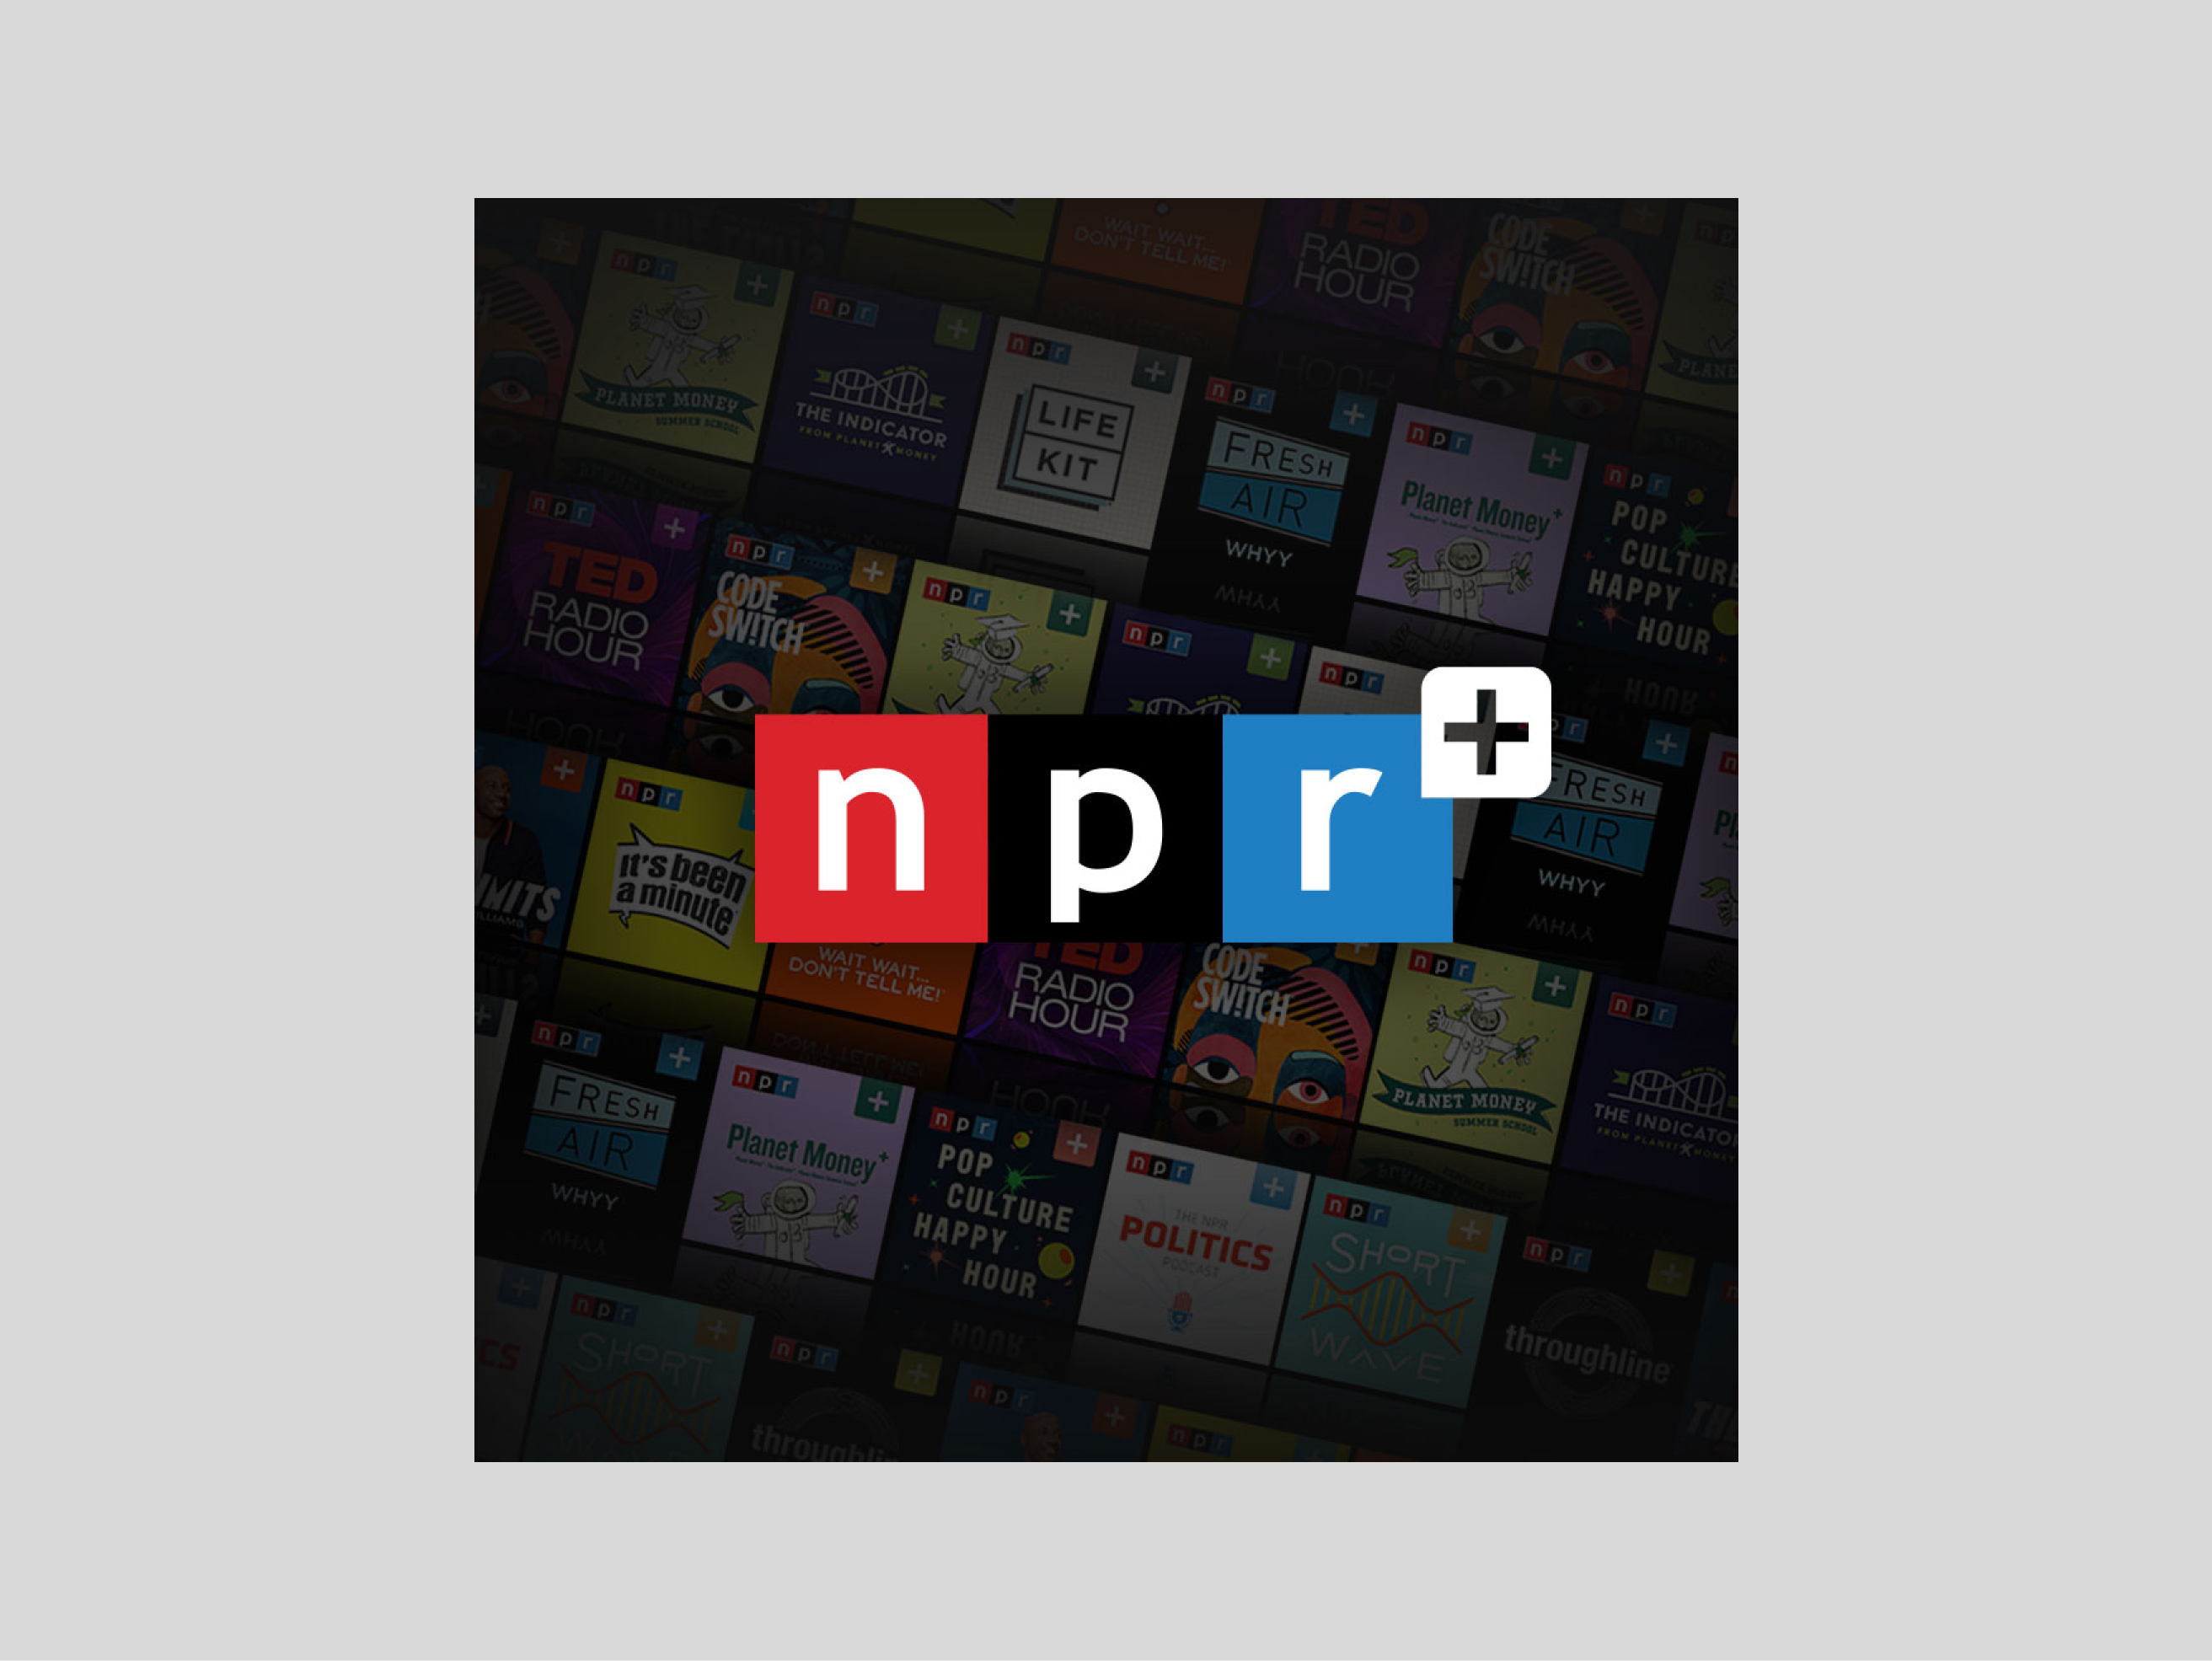 Cover photo for NPR+ Podcast Subscriptions project